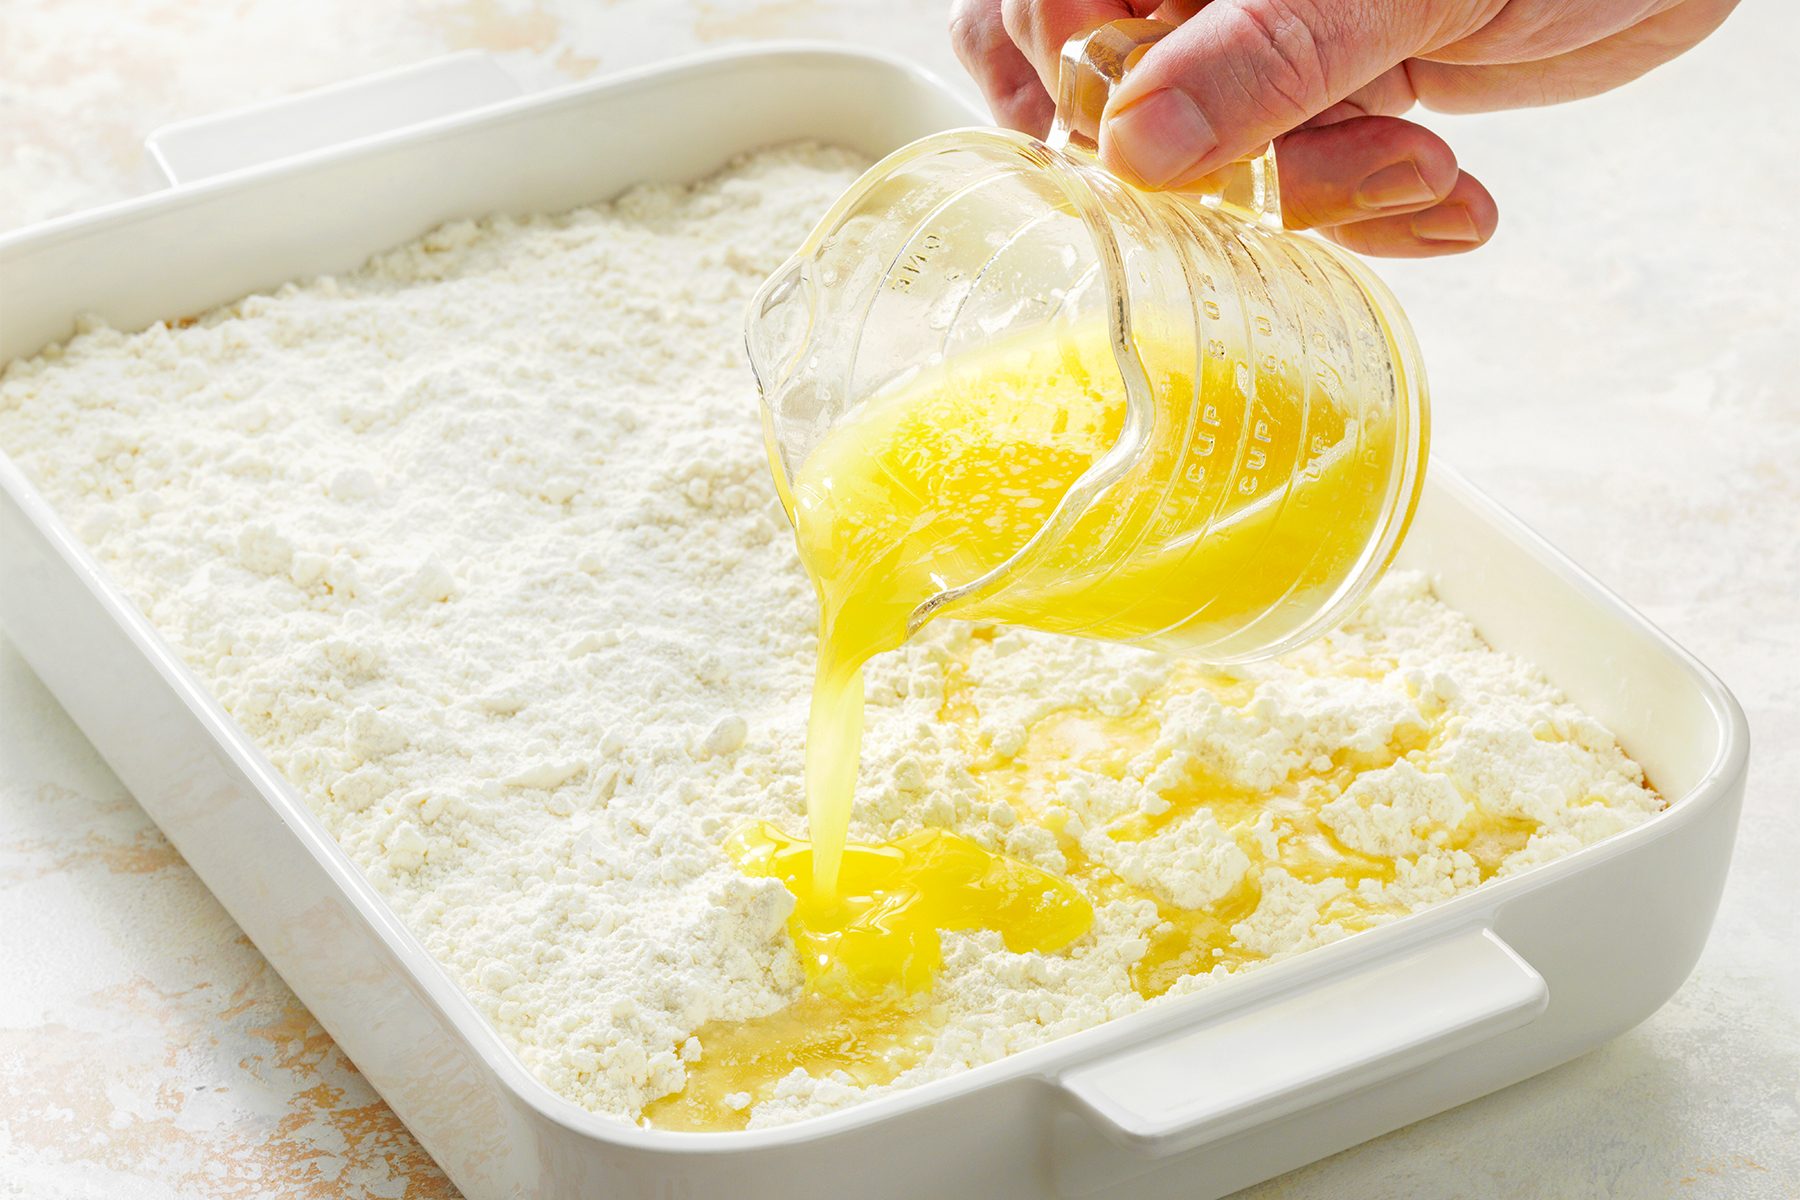 A hand is pouring melted butter from a measuring cup into a rectangular white baking dish filled with flour